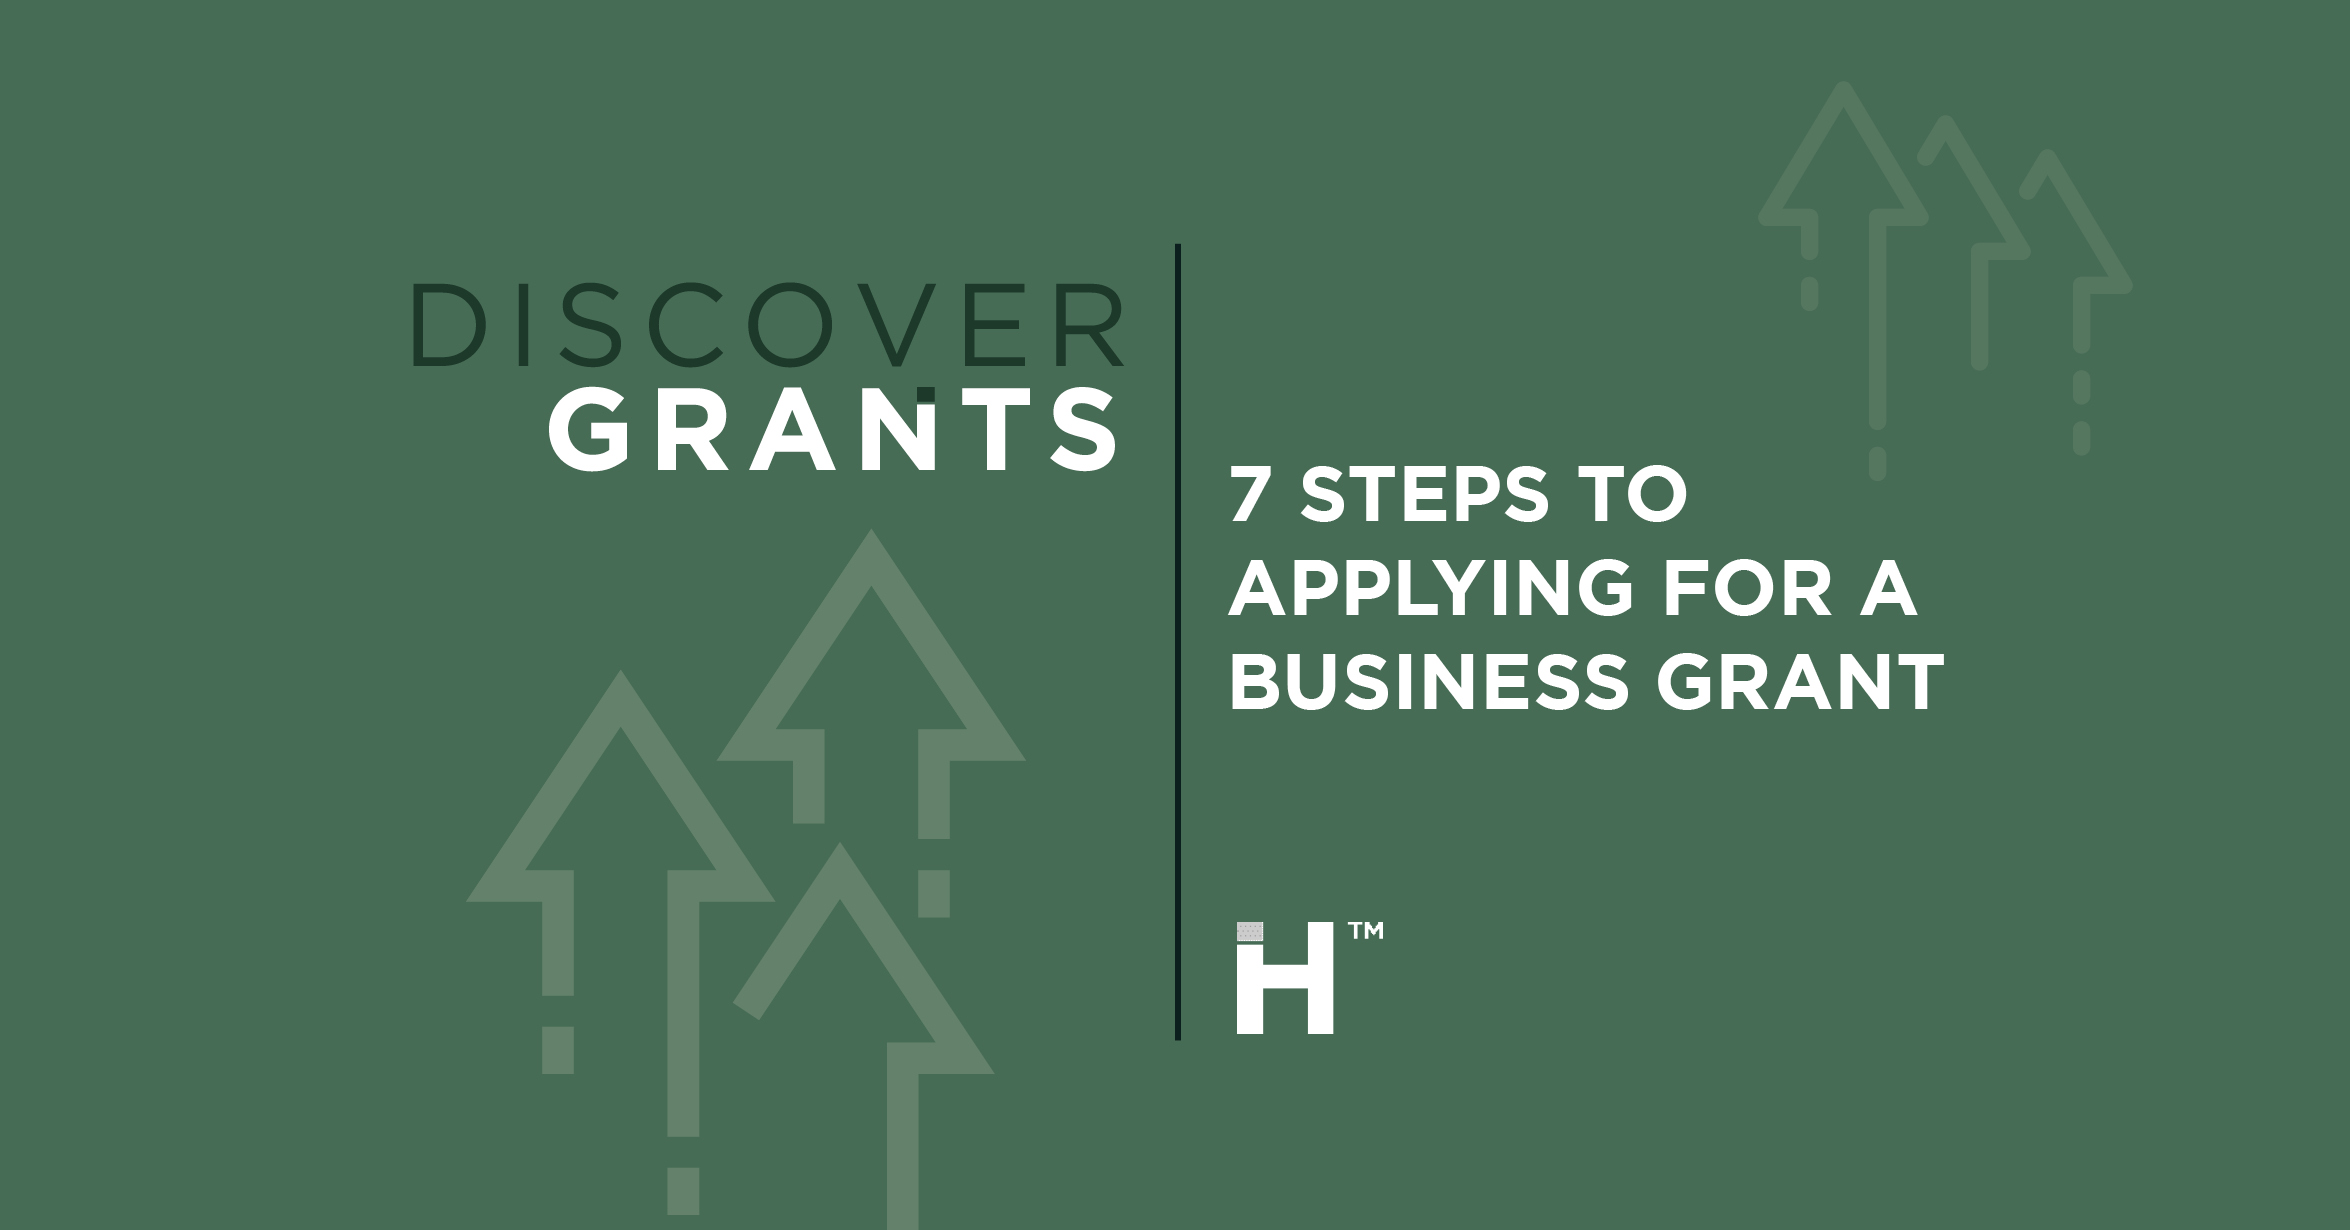 Applying for a business grant